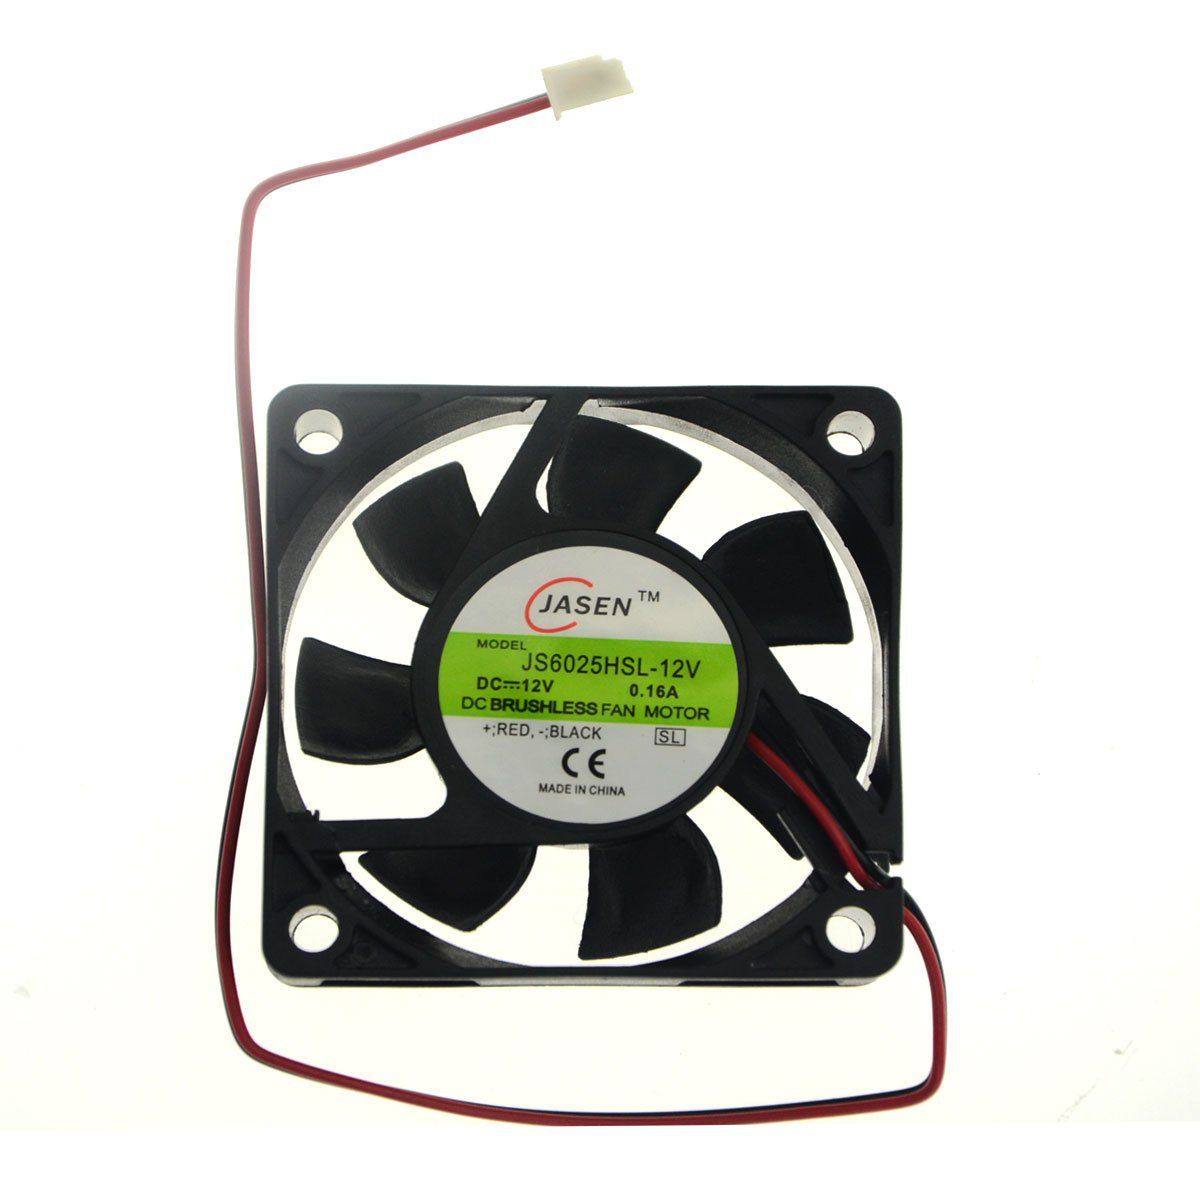 BXQINLENX 6025 Dc12v Quiet Brushless Cooling Fan Miniature Cooling Fans 2pin 60x60X25mm 7 Blade 6025 